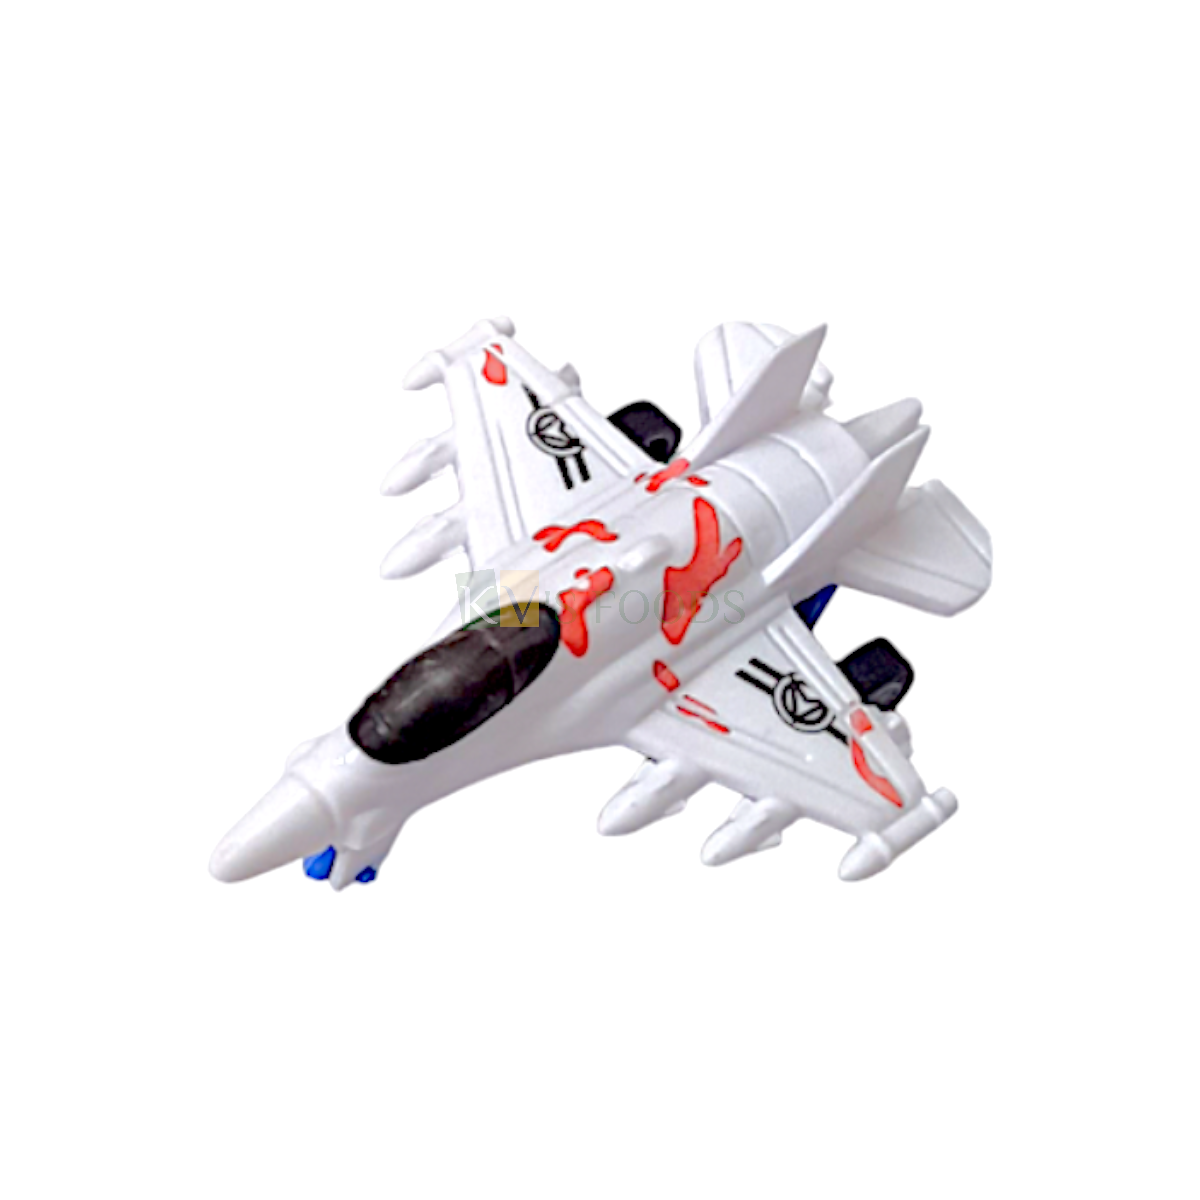 1PC White Colour Pull Back and Go Military Fighter Jet Plane Cake Topper, Plane Toys For Kids, Airplane, Aeroplane Cake Topper Toy for Cakes Decoration, Miniature Figurine Cake Topper for Pilot Theme